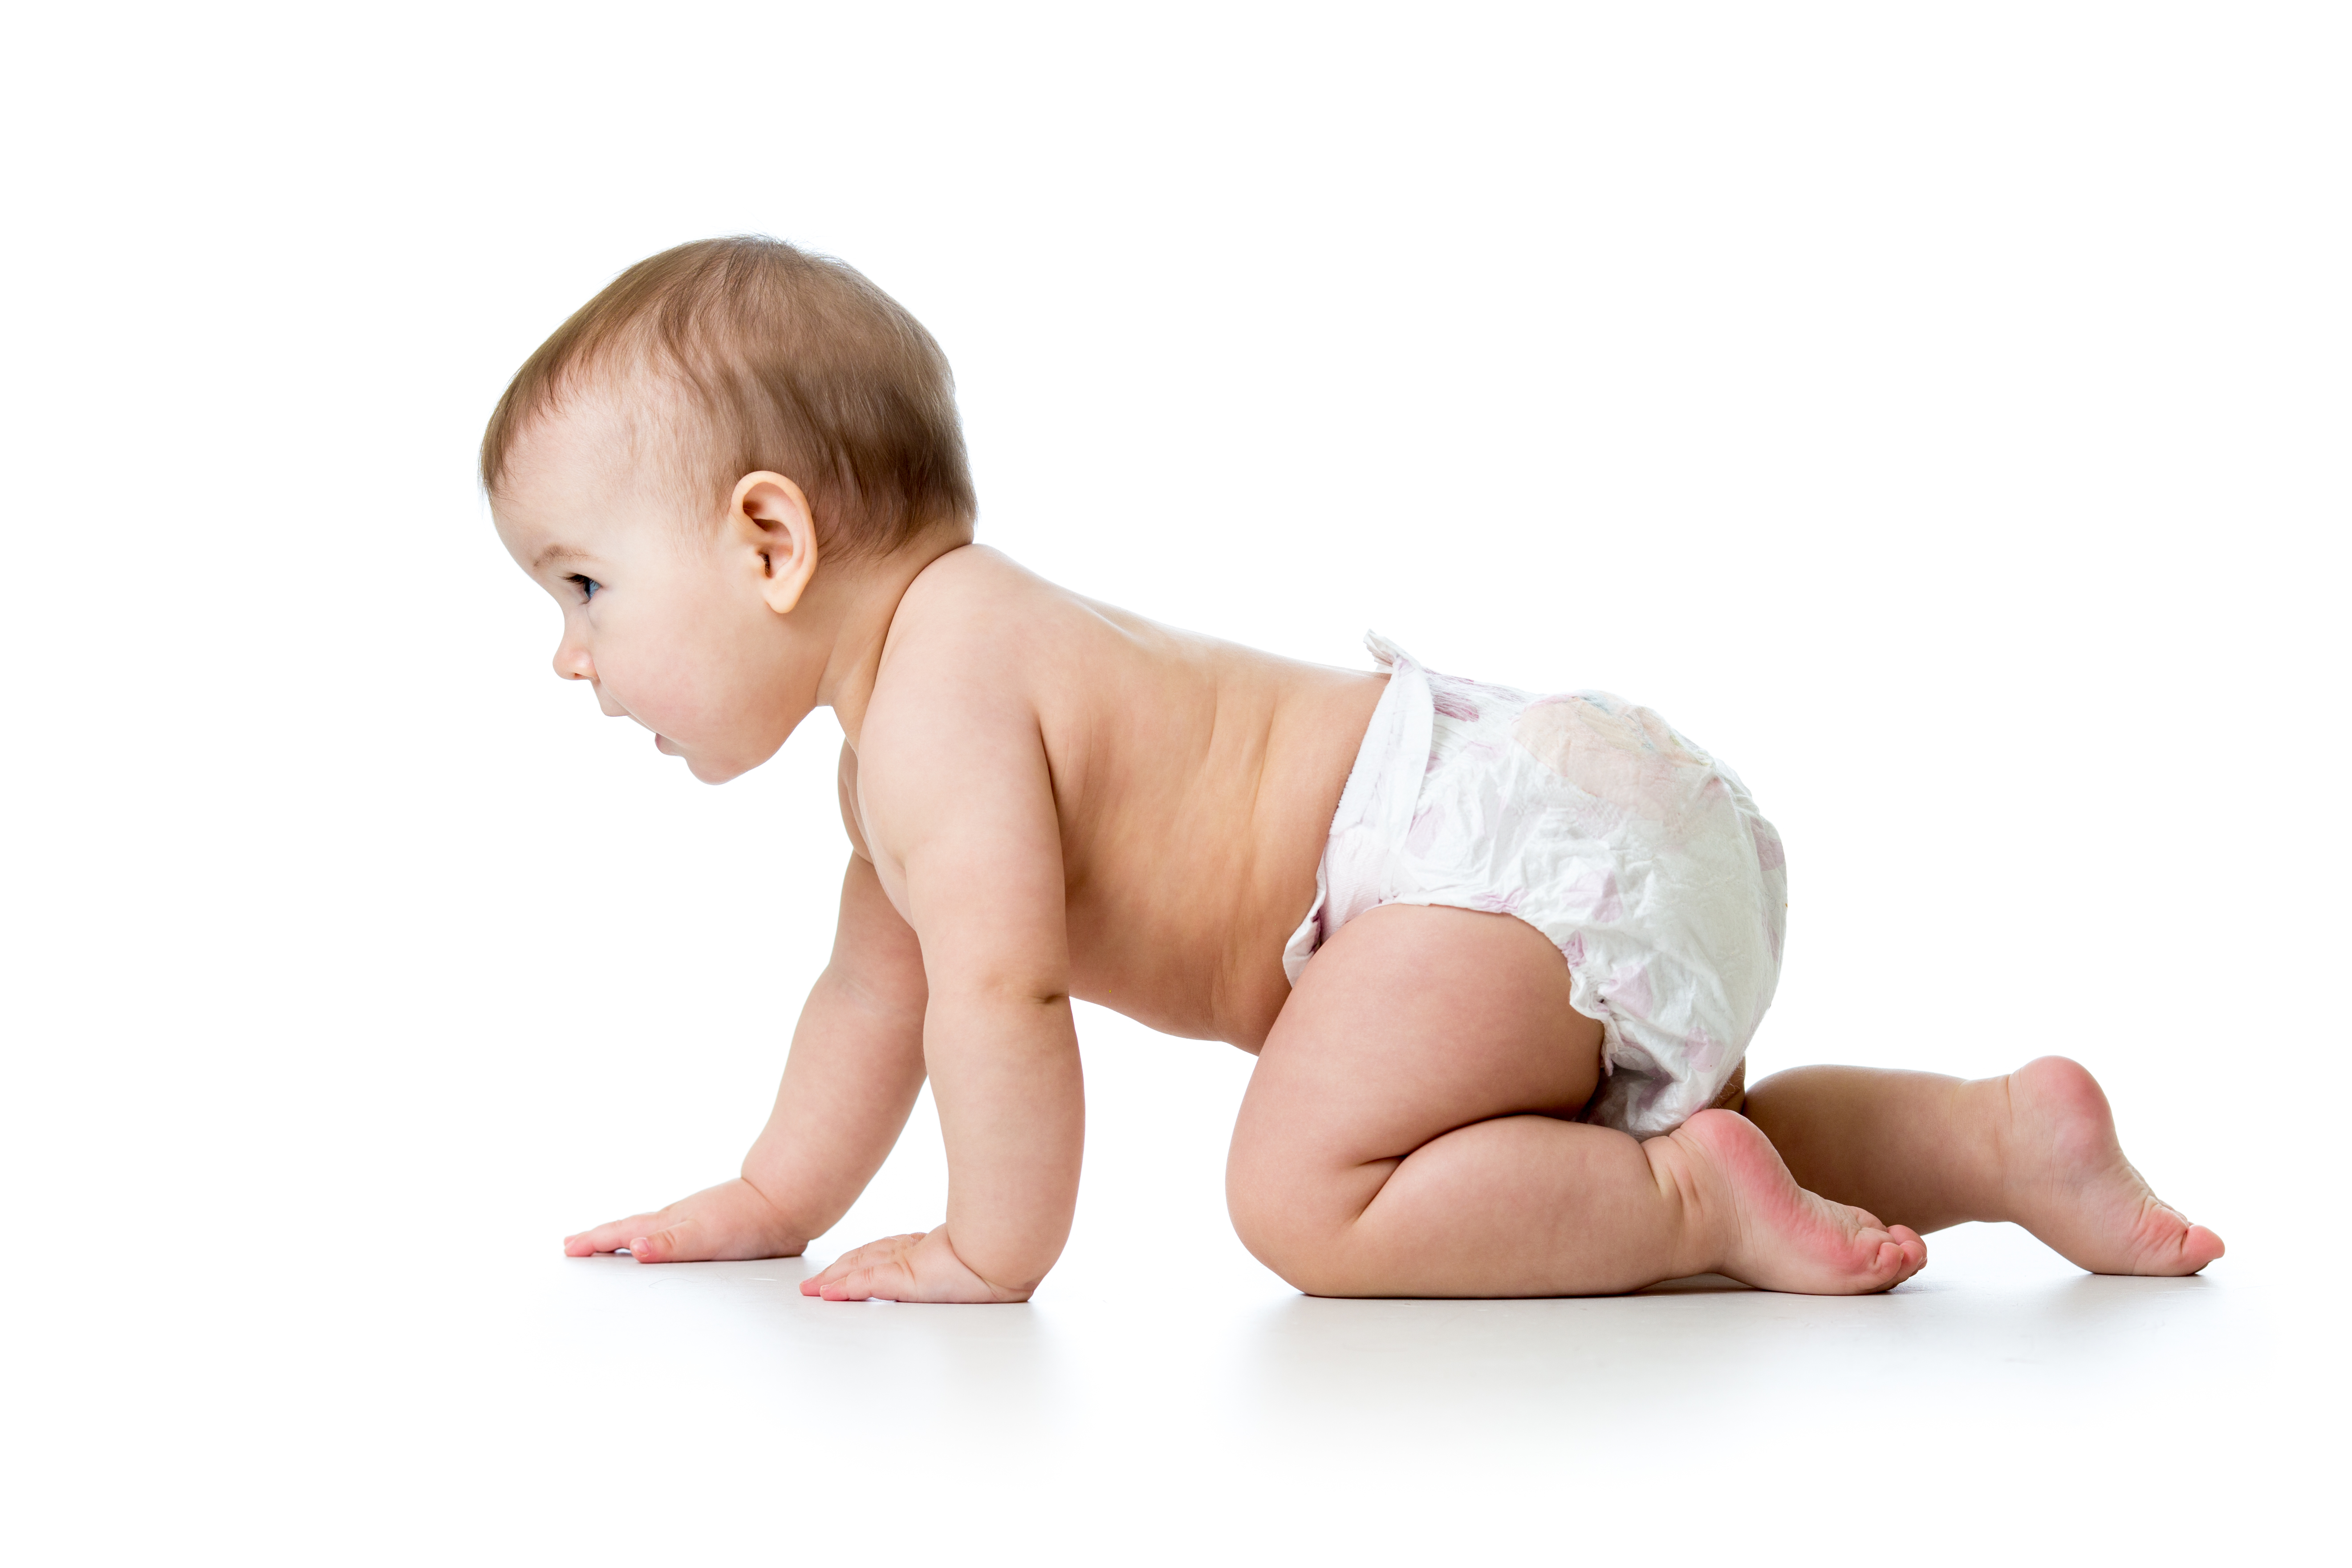 89001 Hot Baby Images, Stock Photos & Vectors